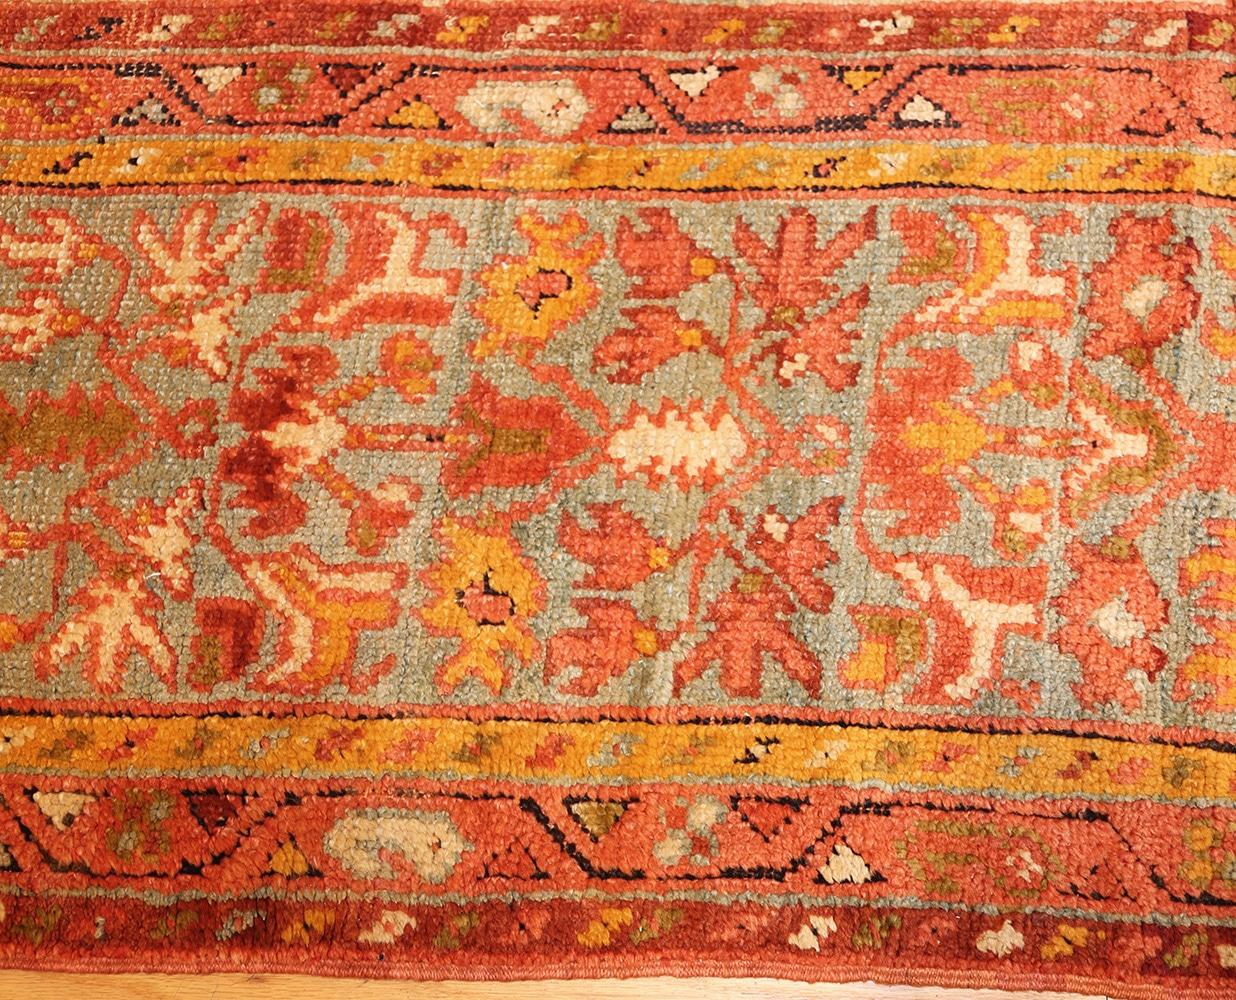 Antique Turkish Oushak rug, country of origin: Turkey, date circa 1900. Size: 12 ft. x 16 ft. (3.66 m x 4.88 m)

Western Turkey produced some of the most desirable carpets attributed to the Ottoman Empire, and this vintage Oushak rug upholds the